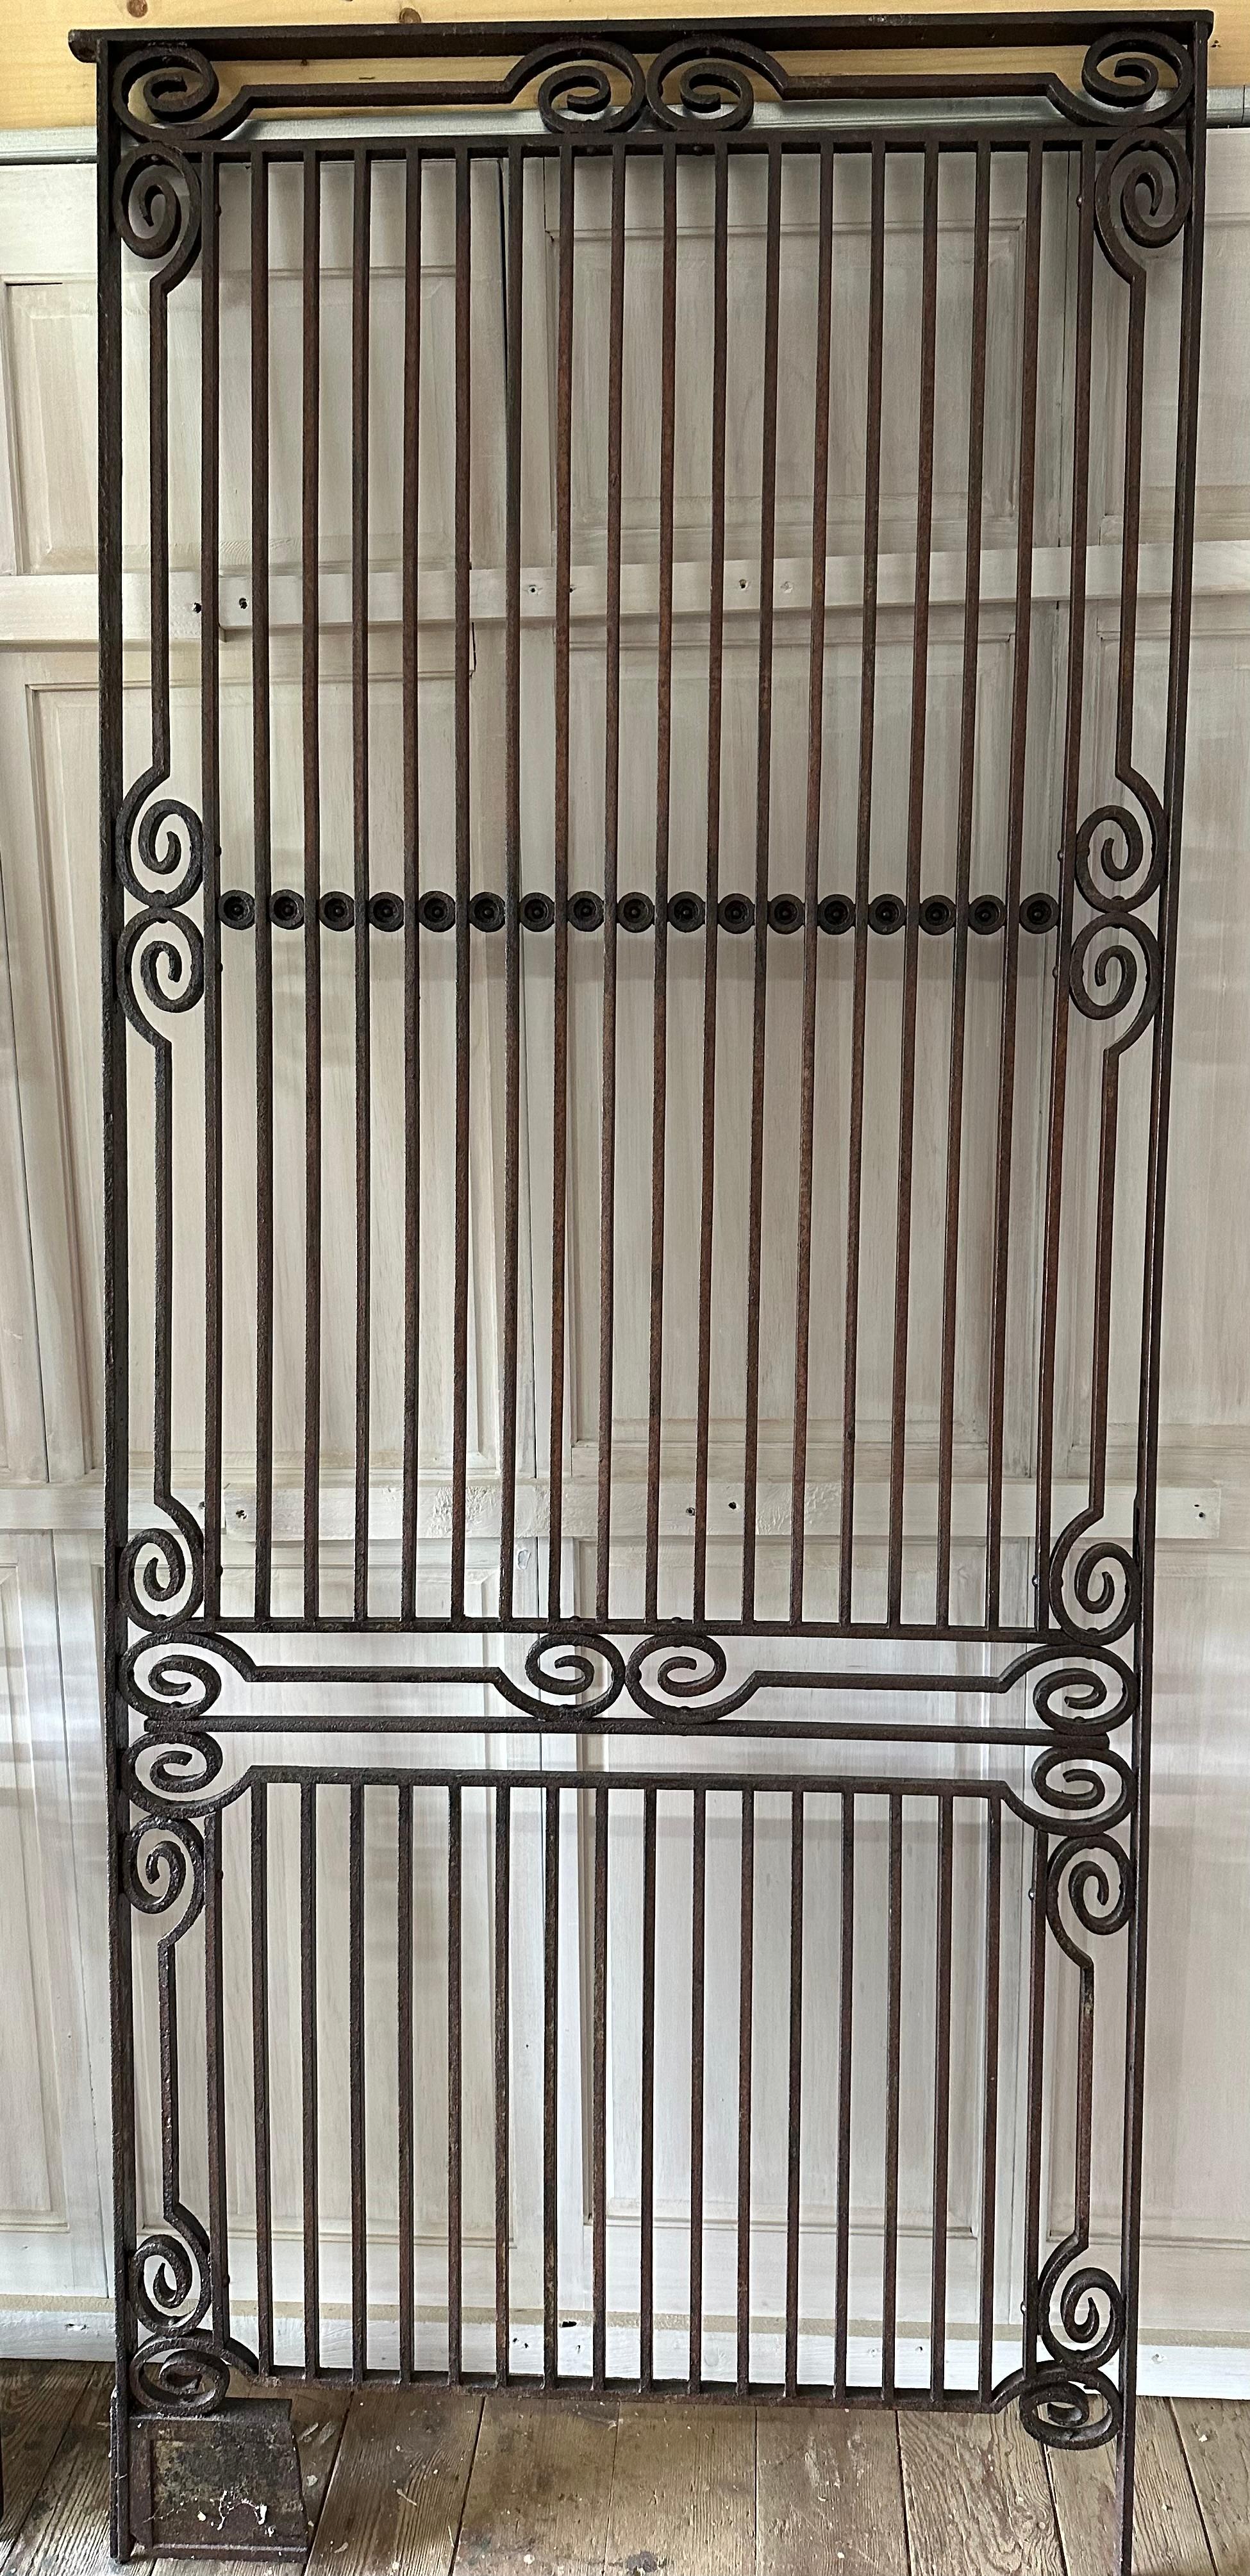 A collection or a group of 7 antique metal wrought iron gate panels.  Depending on your needs, you can buy a single panel or all 7.  These gates offer a wonderful opportunity to create a spectacular entrance, wall or gateway to a driveway, entrance 